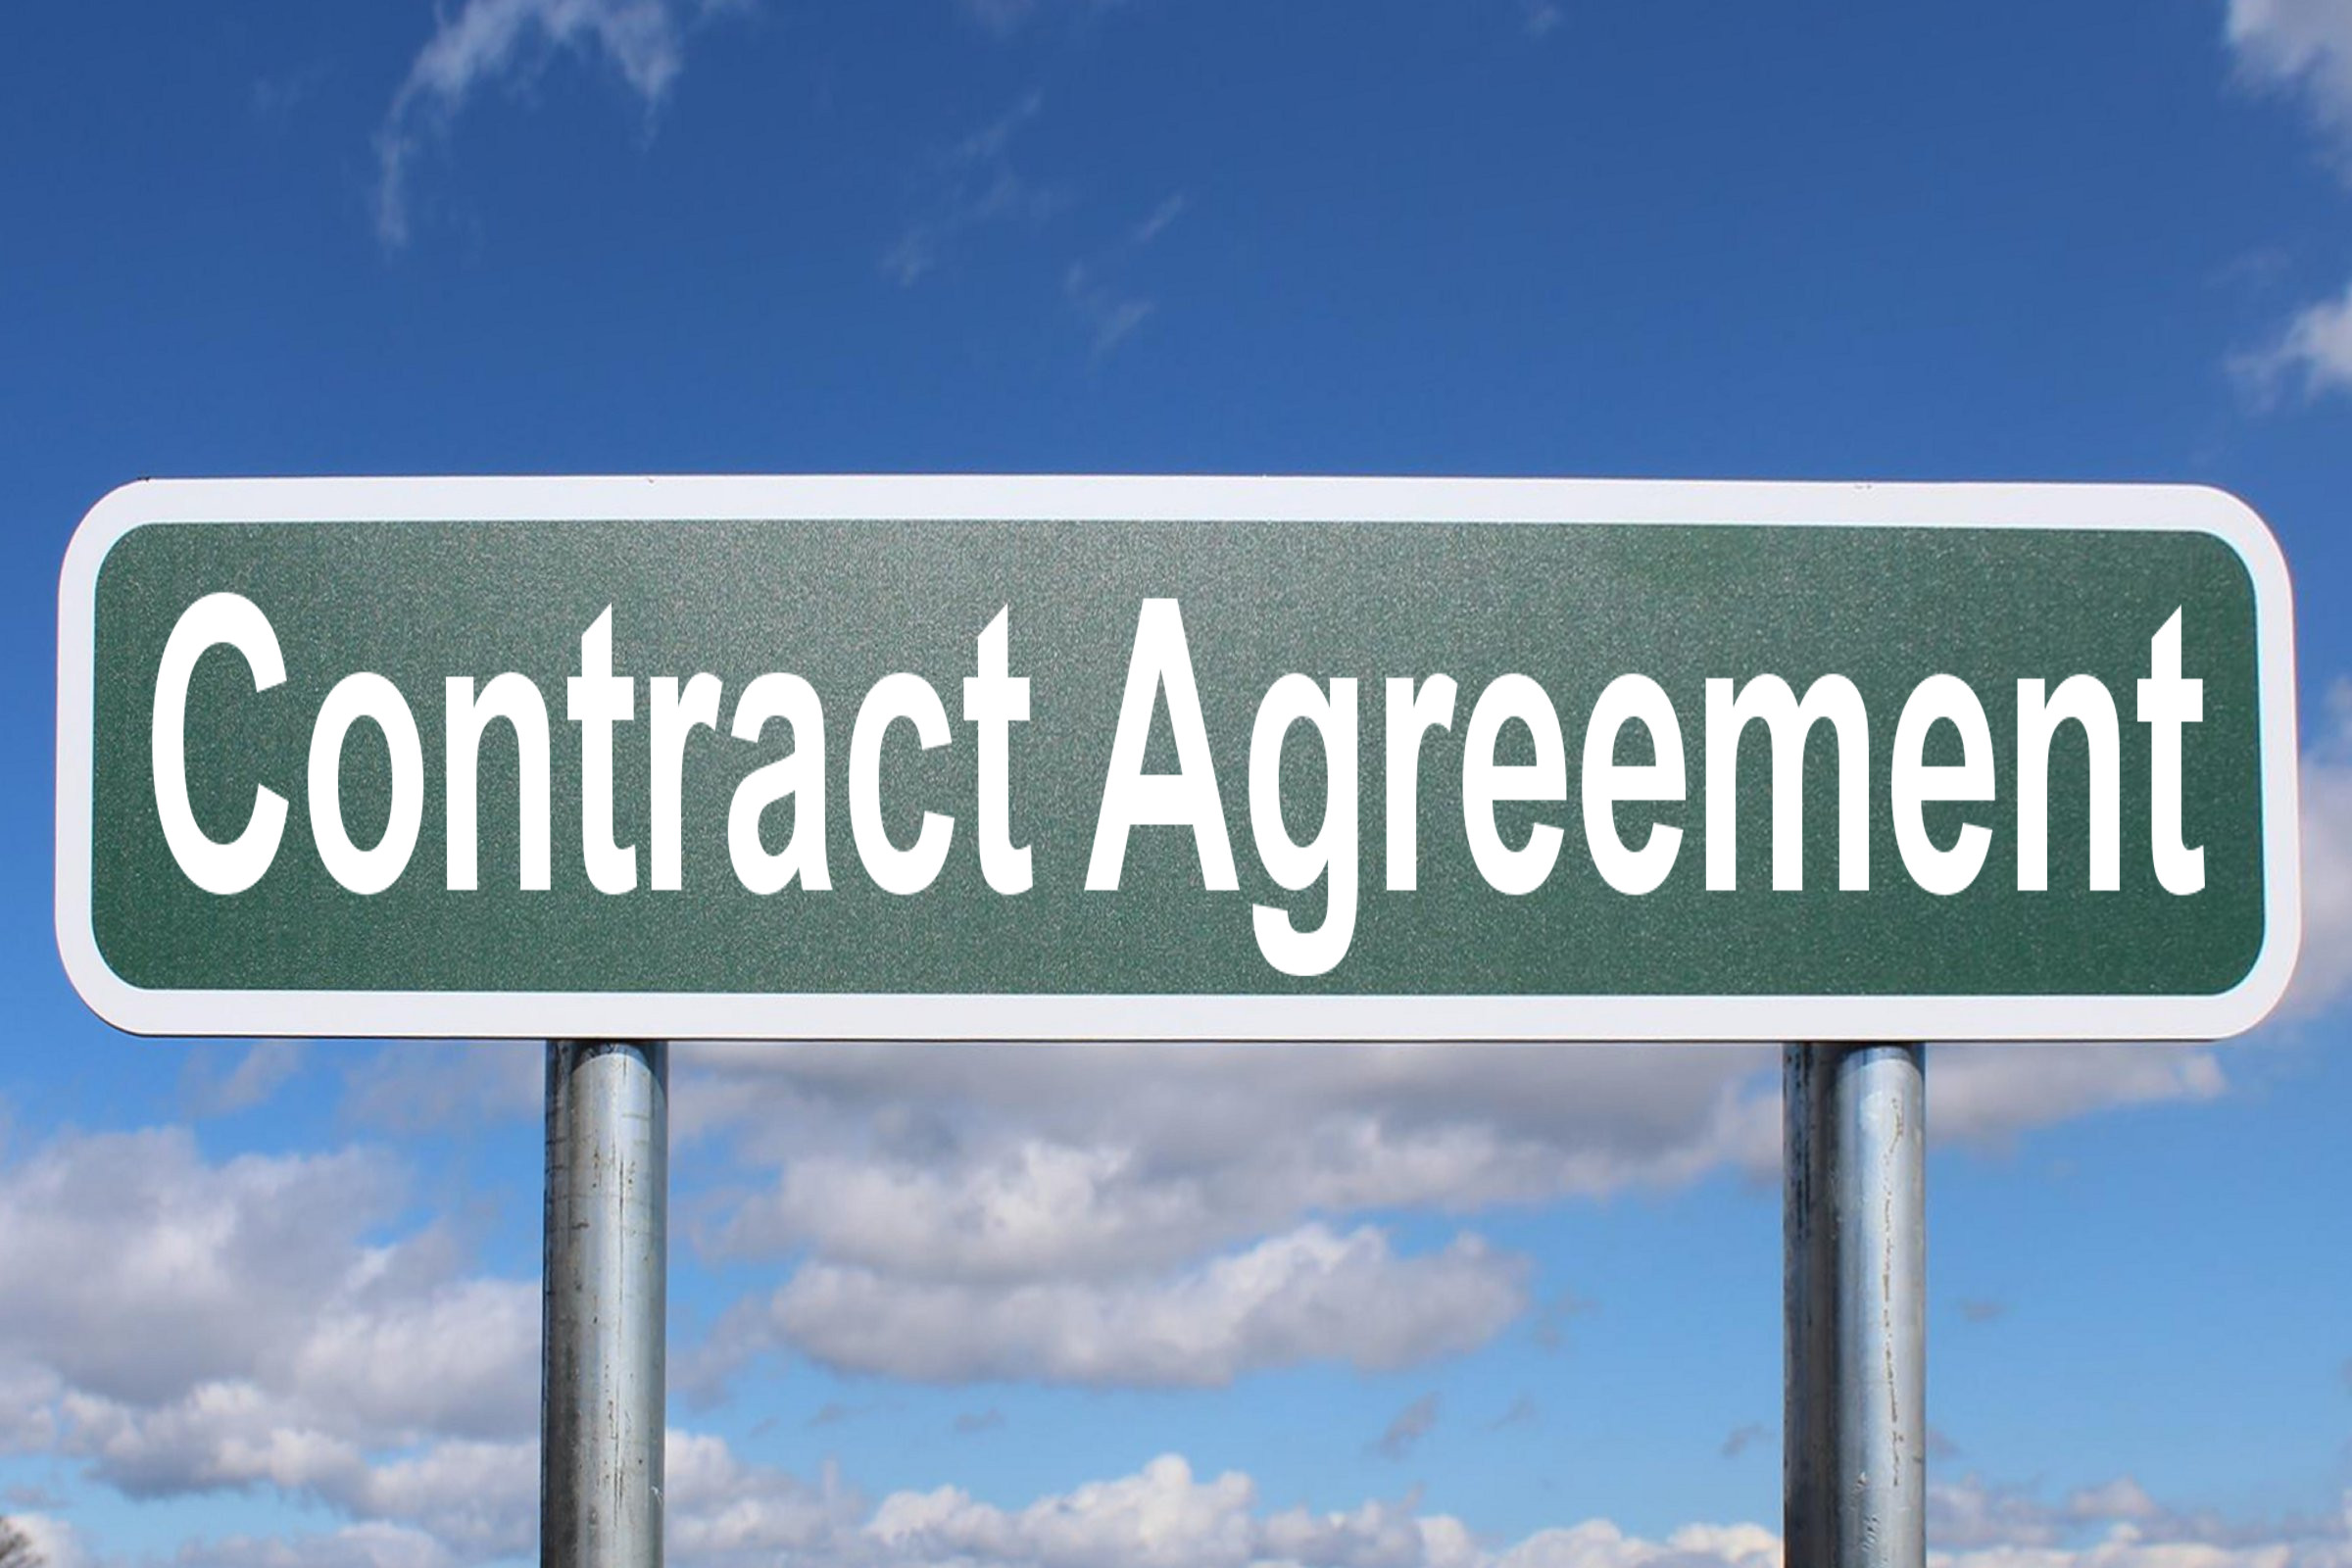 contract agreement